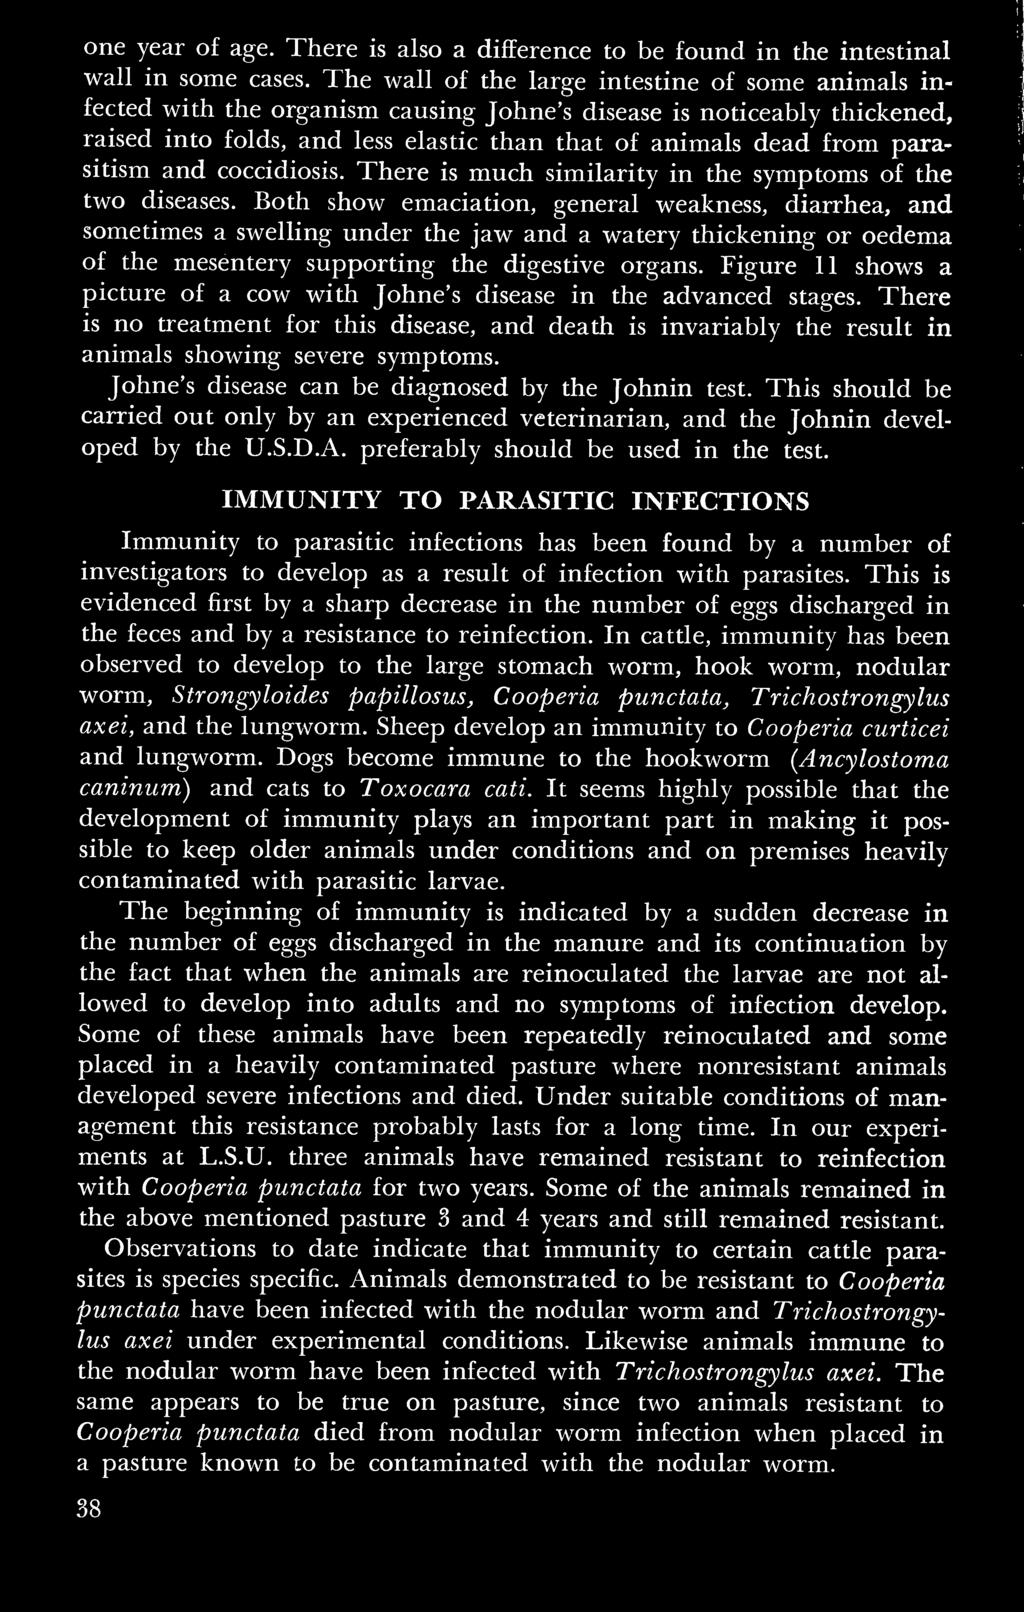 parasitism and coccidiosis. There is much similarity in the symptoms of the two diseases.